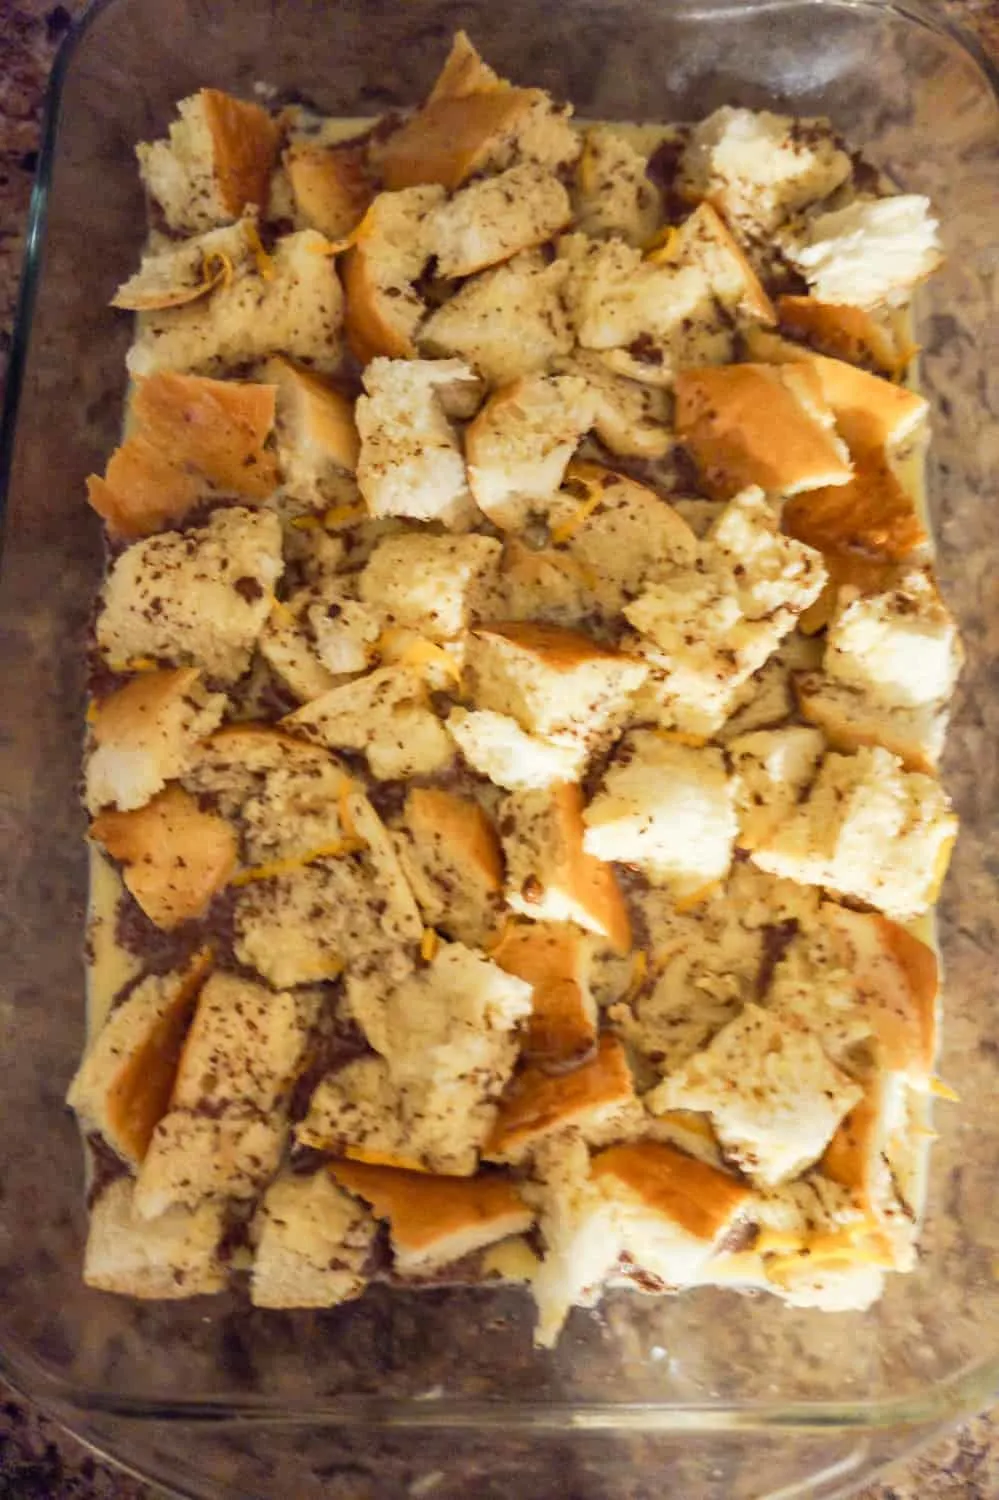 egg and cinnamon mixture poured over bread cubes in a baking dish